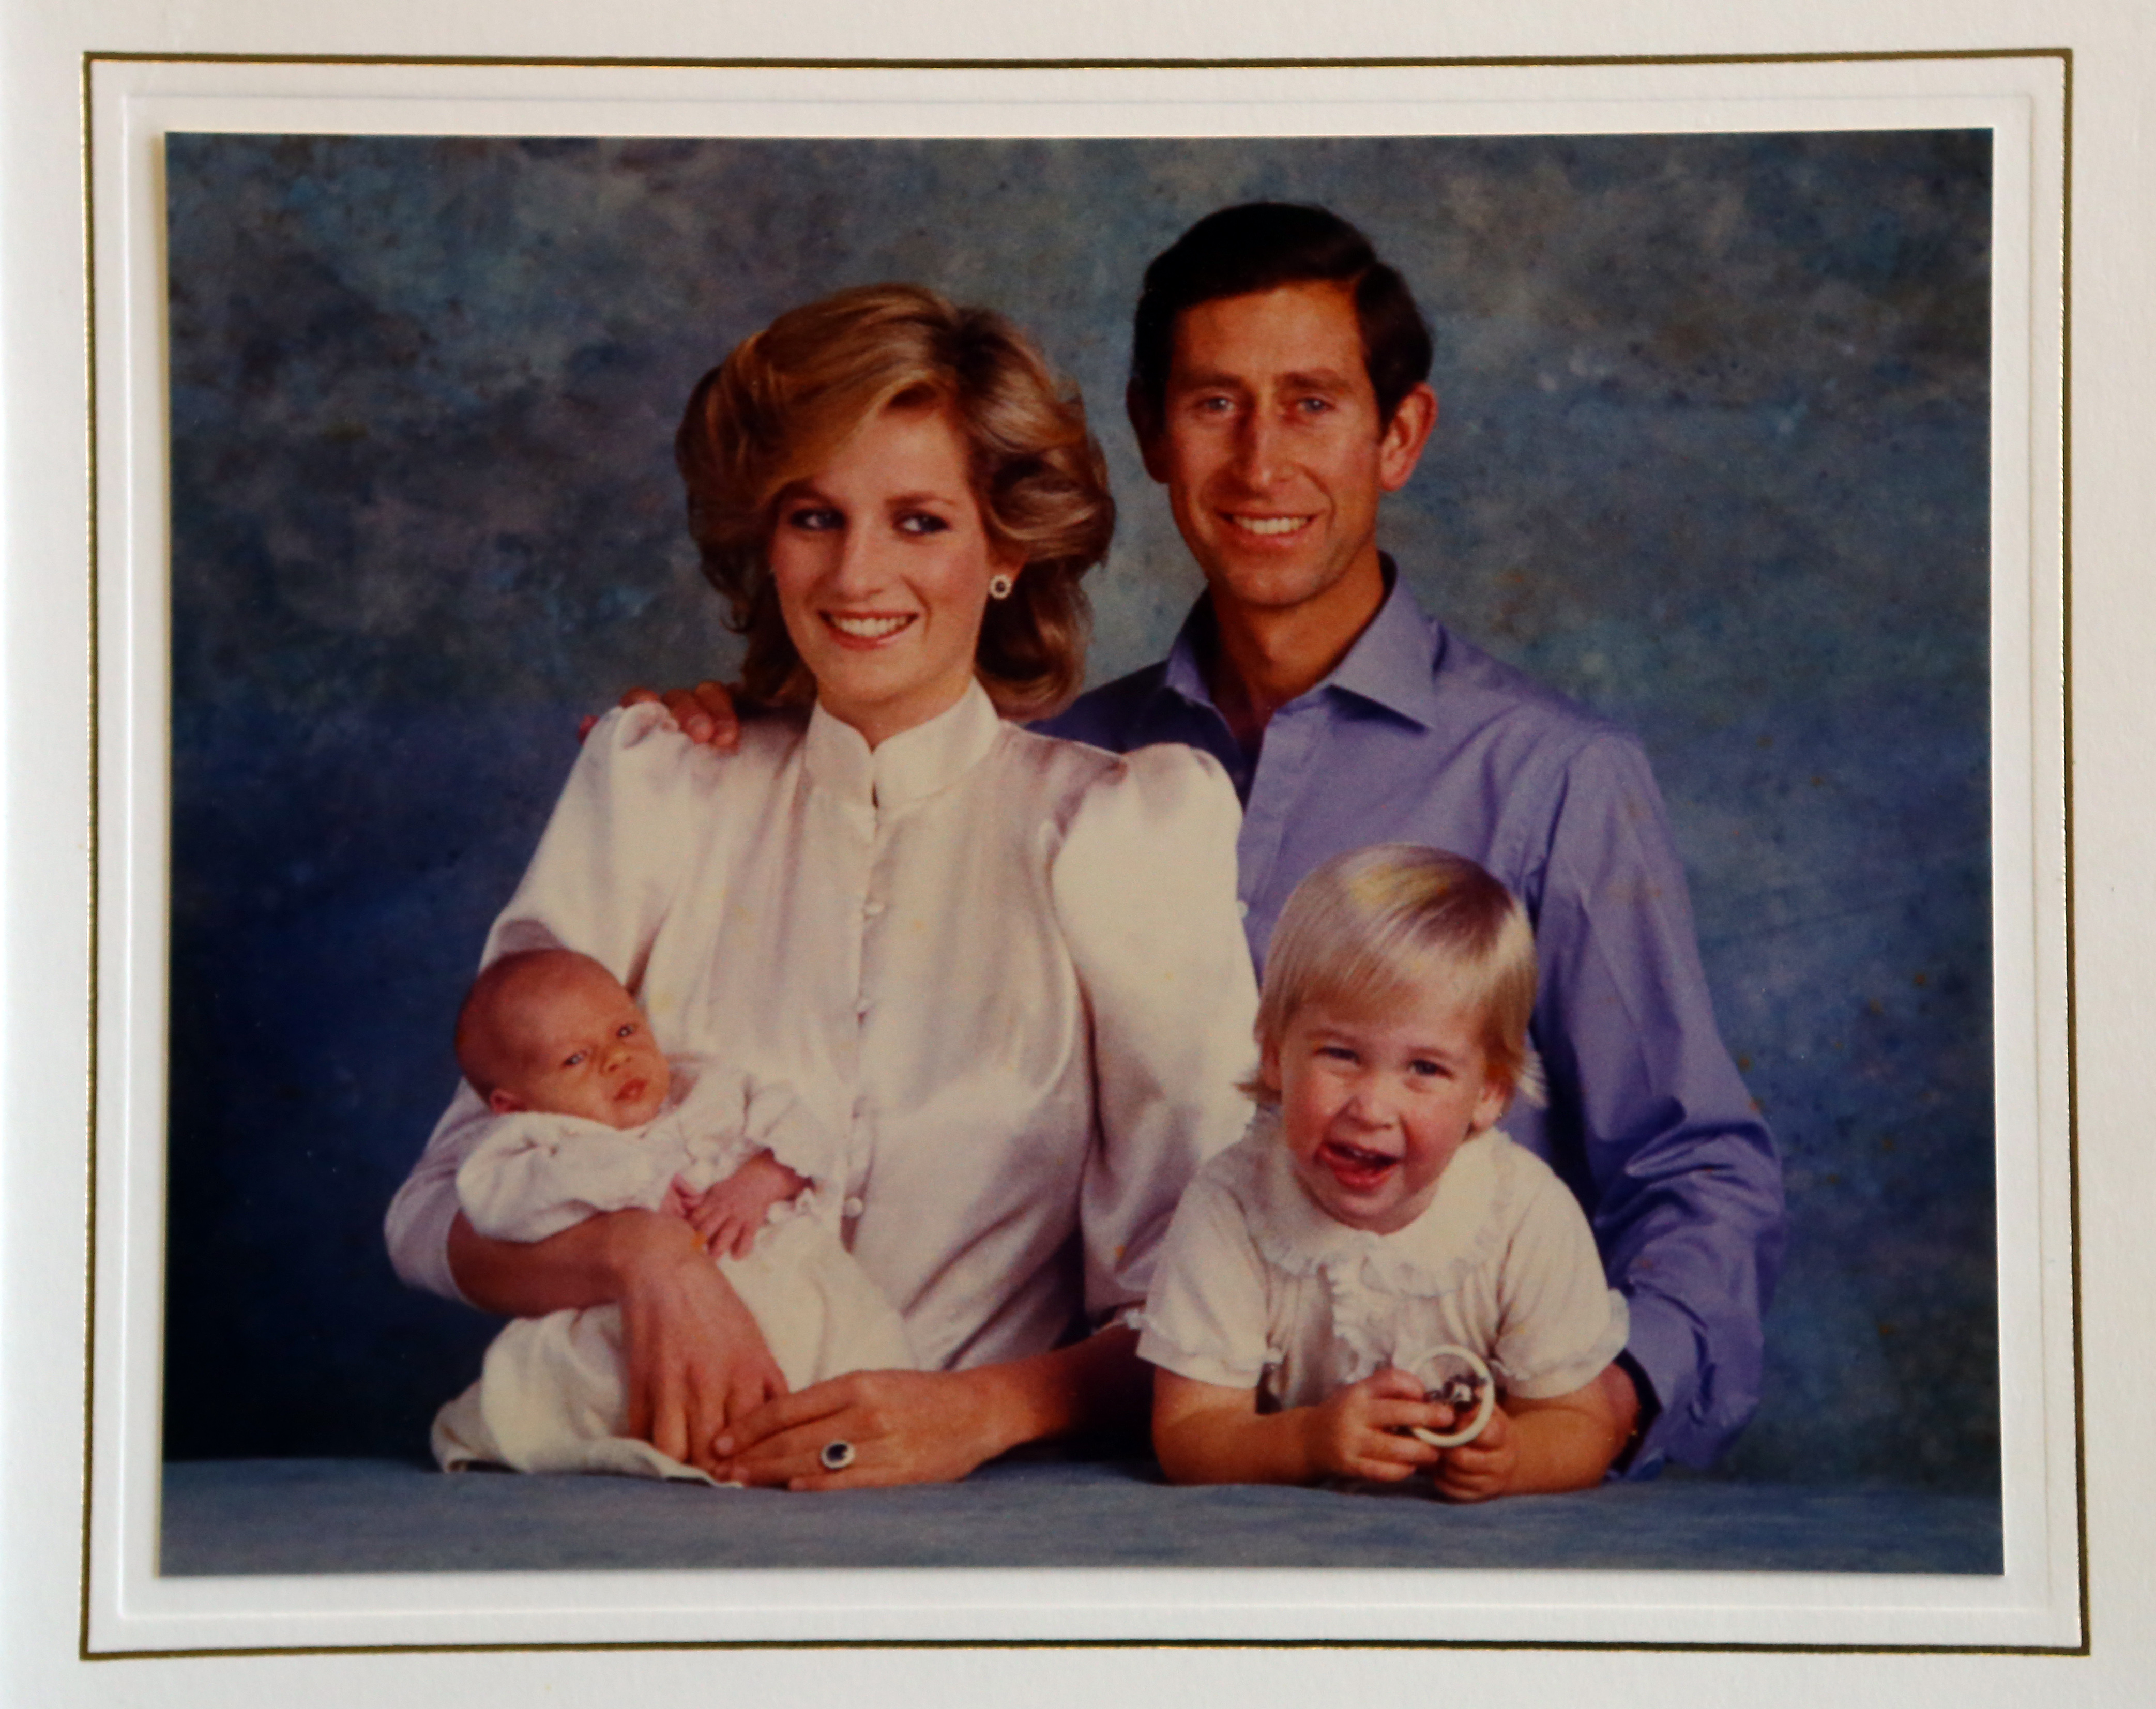 1984 Royal Christmas Card.  Prince Charles and Princess Diana with their children Harry and William.